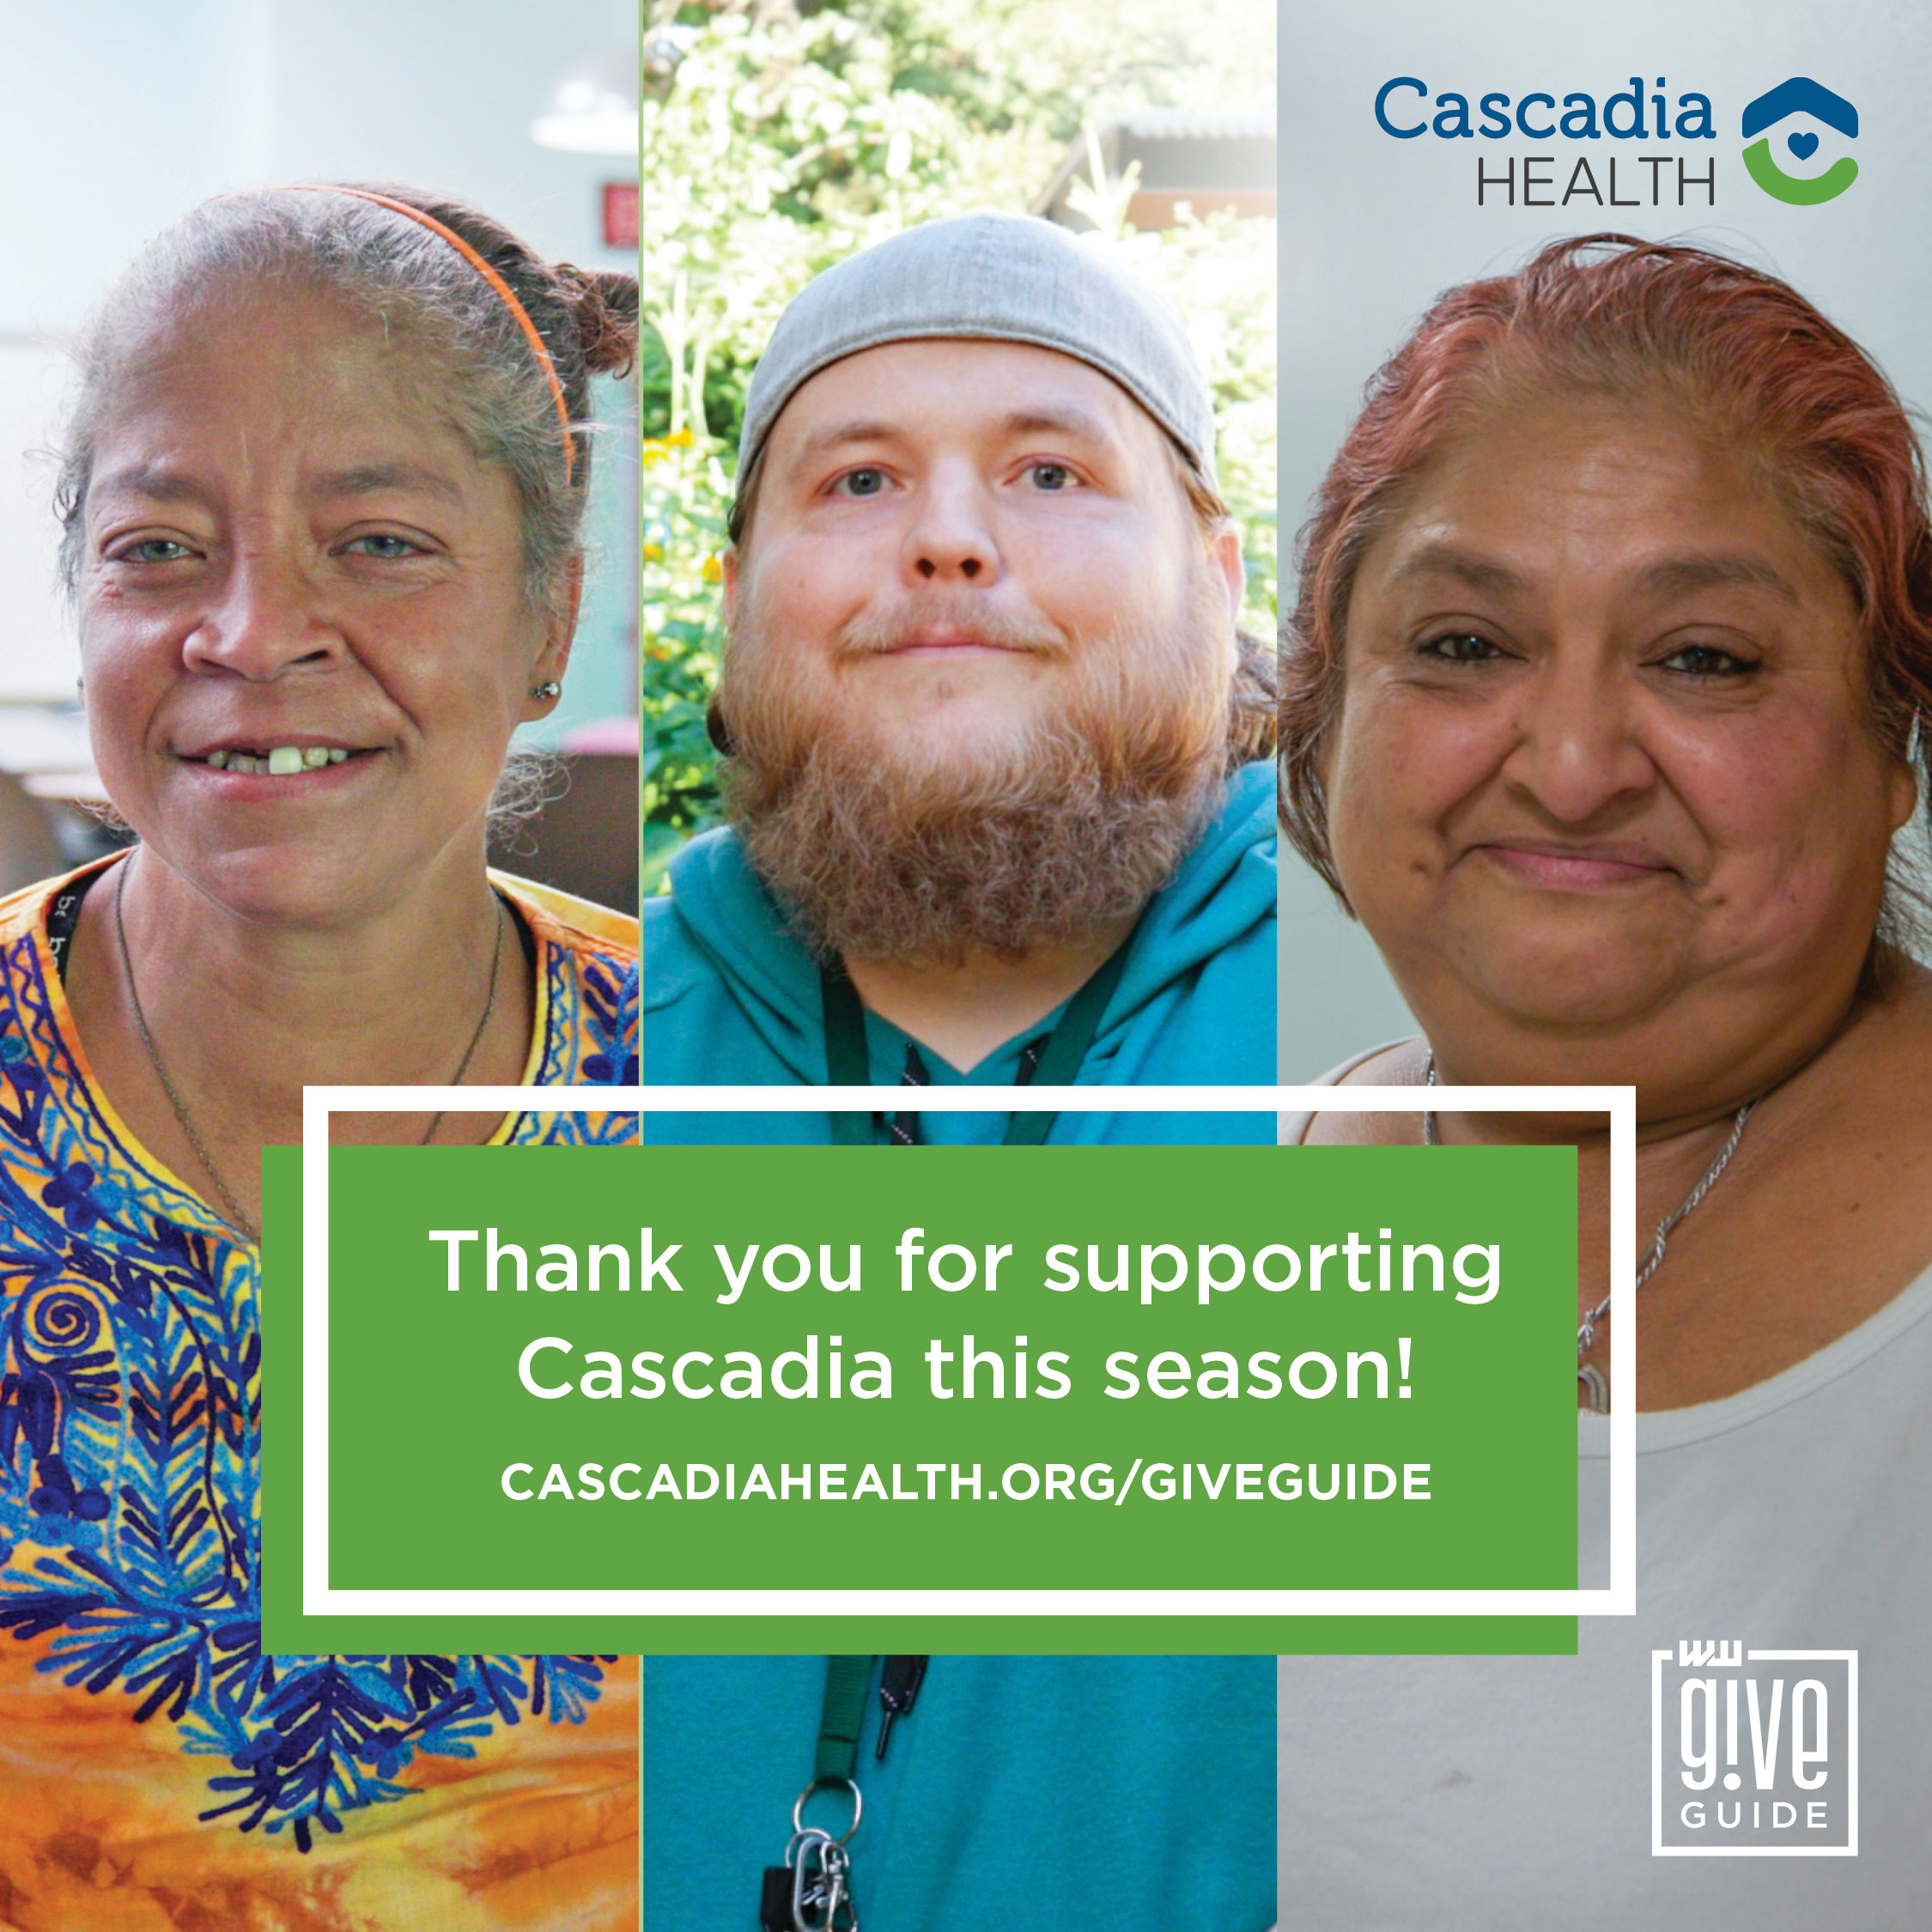 The Cascadia clients smiling, accompanied by the words, "thank you for supporting Cascadia this season!"